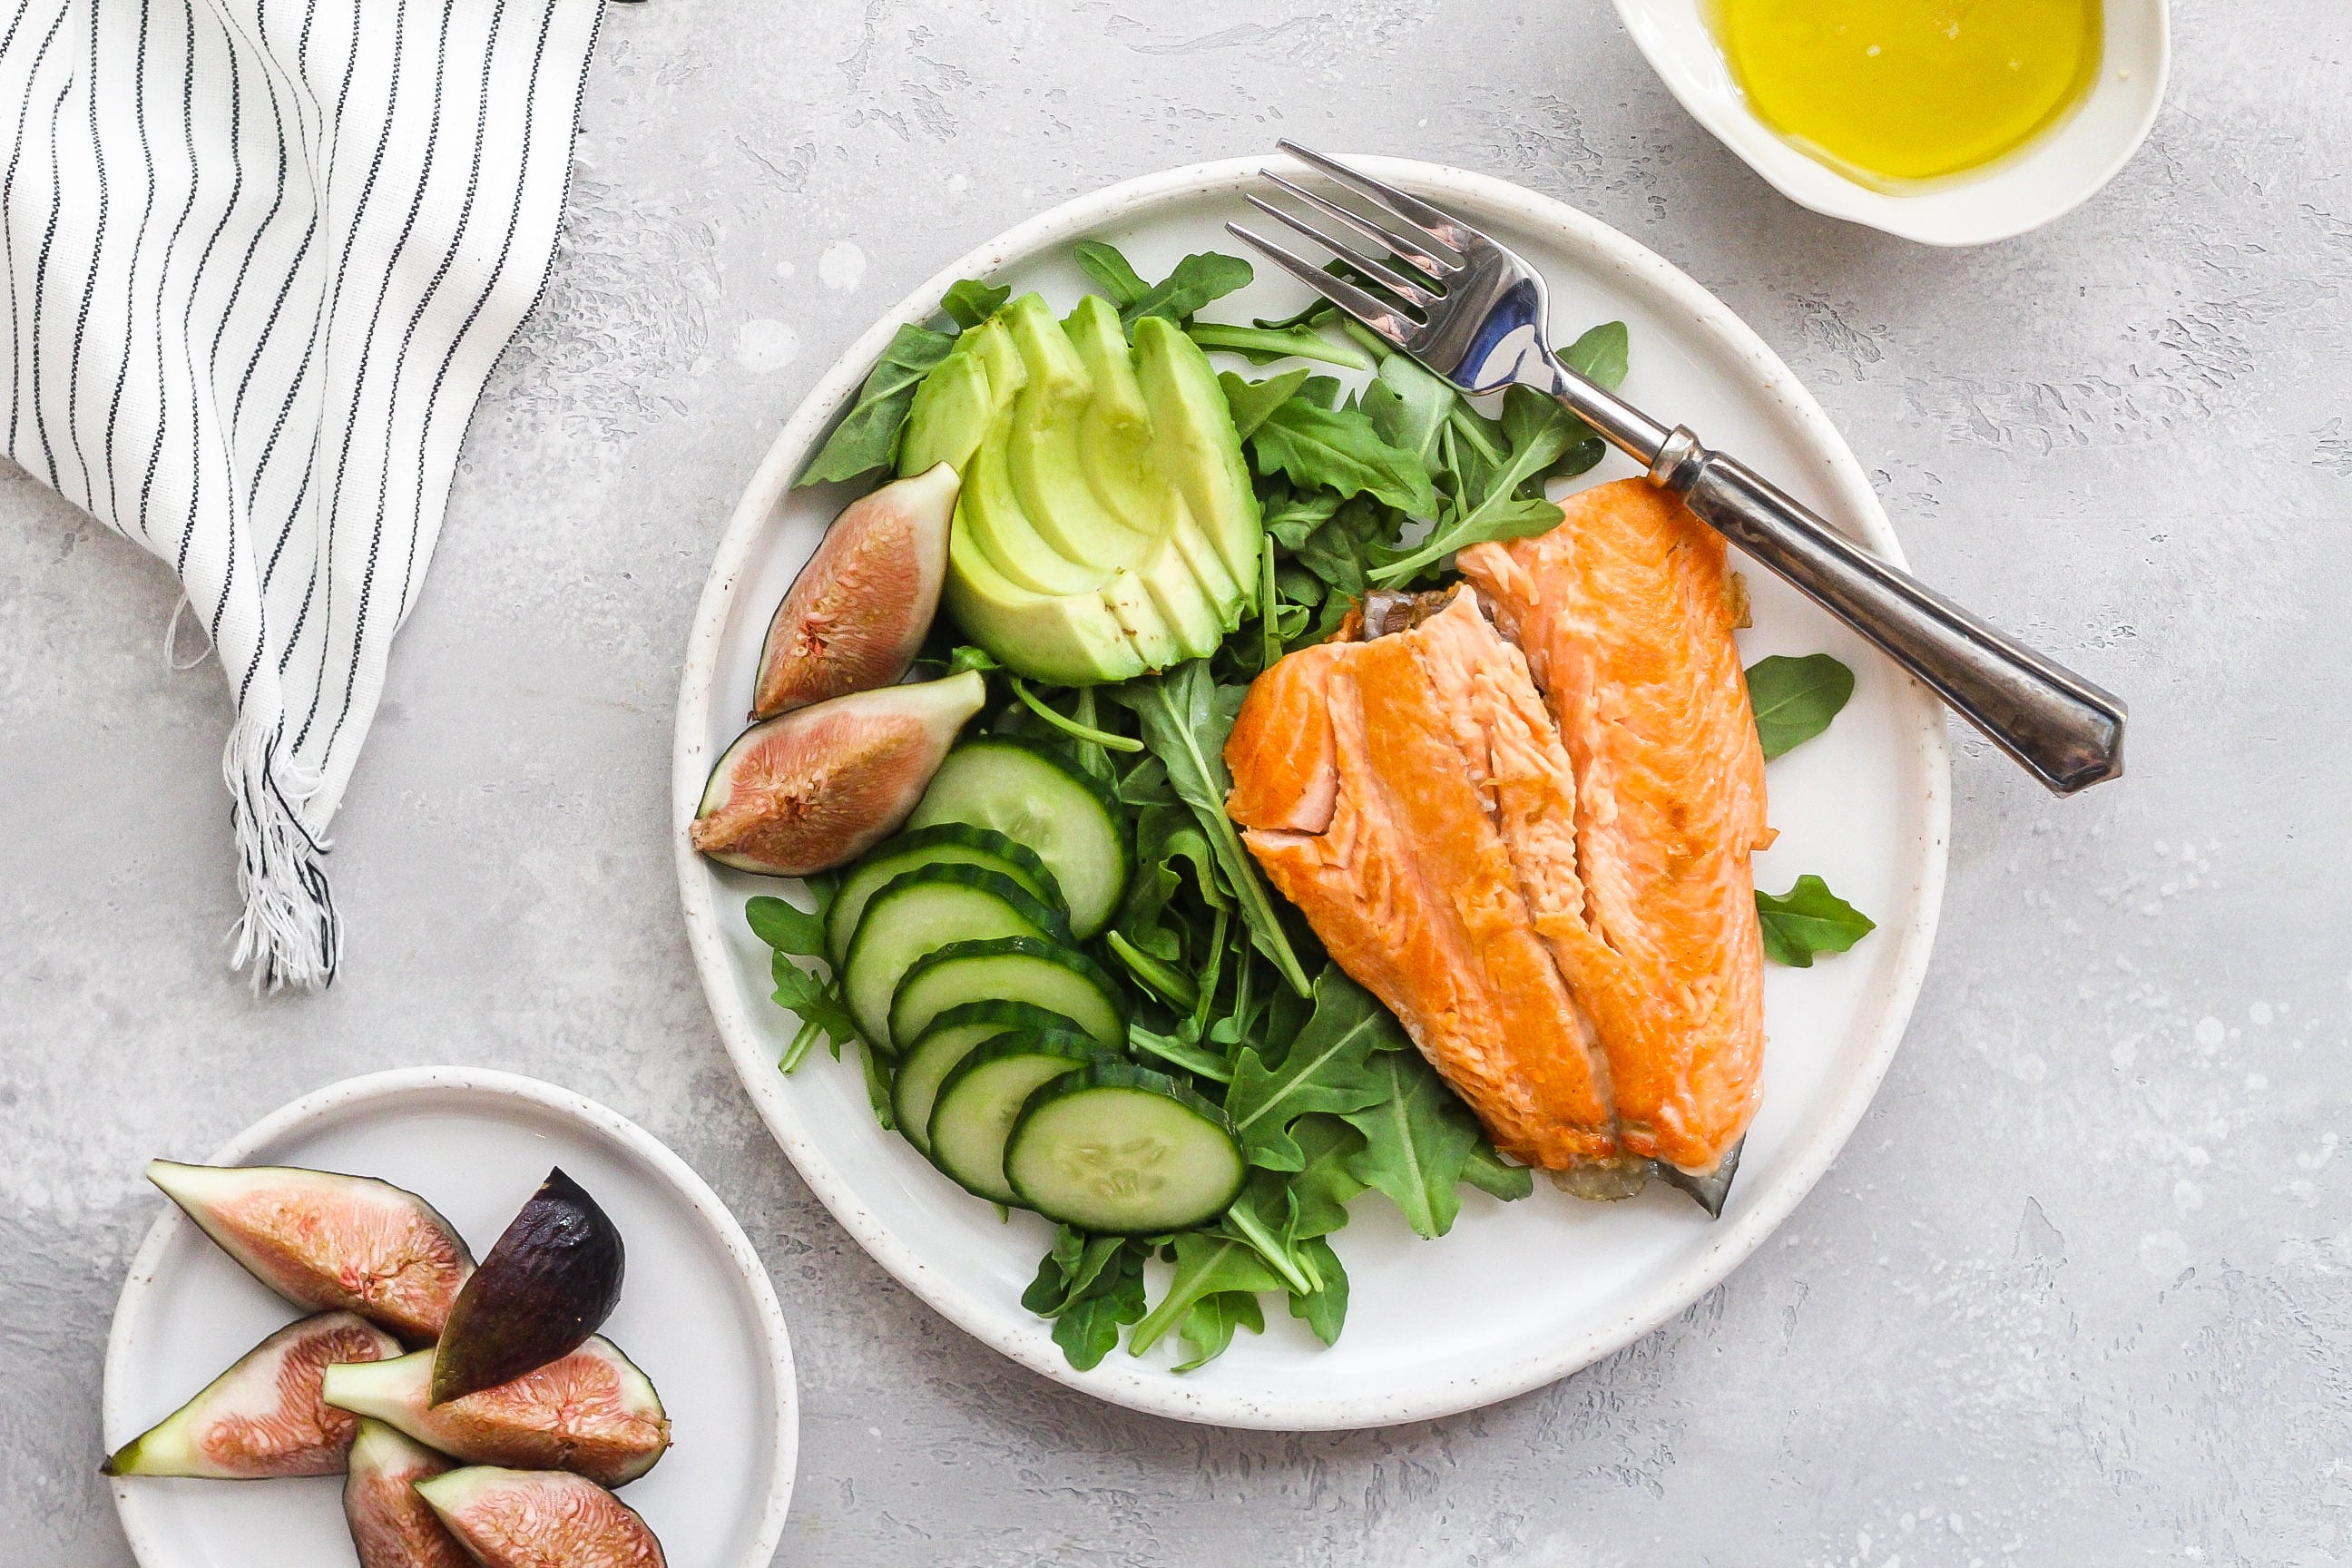 20 Meals Your Postnatal Clients Will Love: Arugula Salad with Salmon